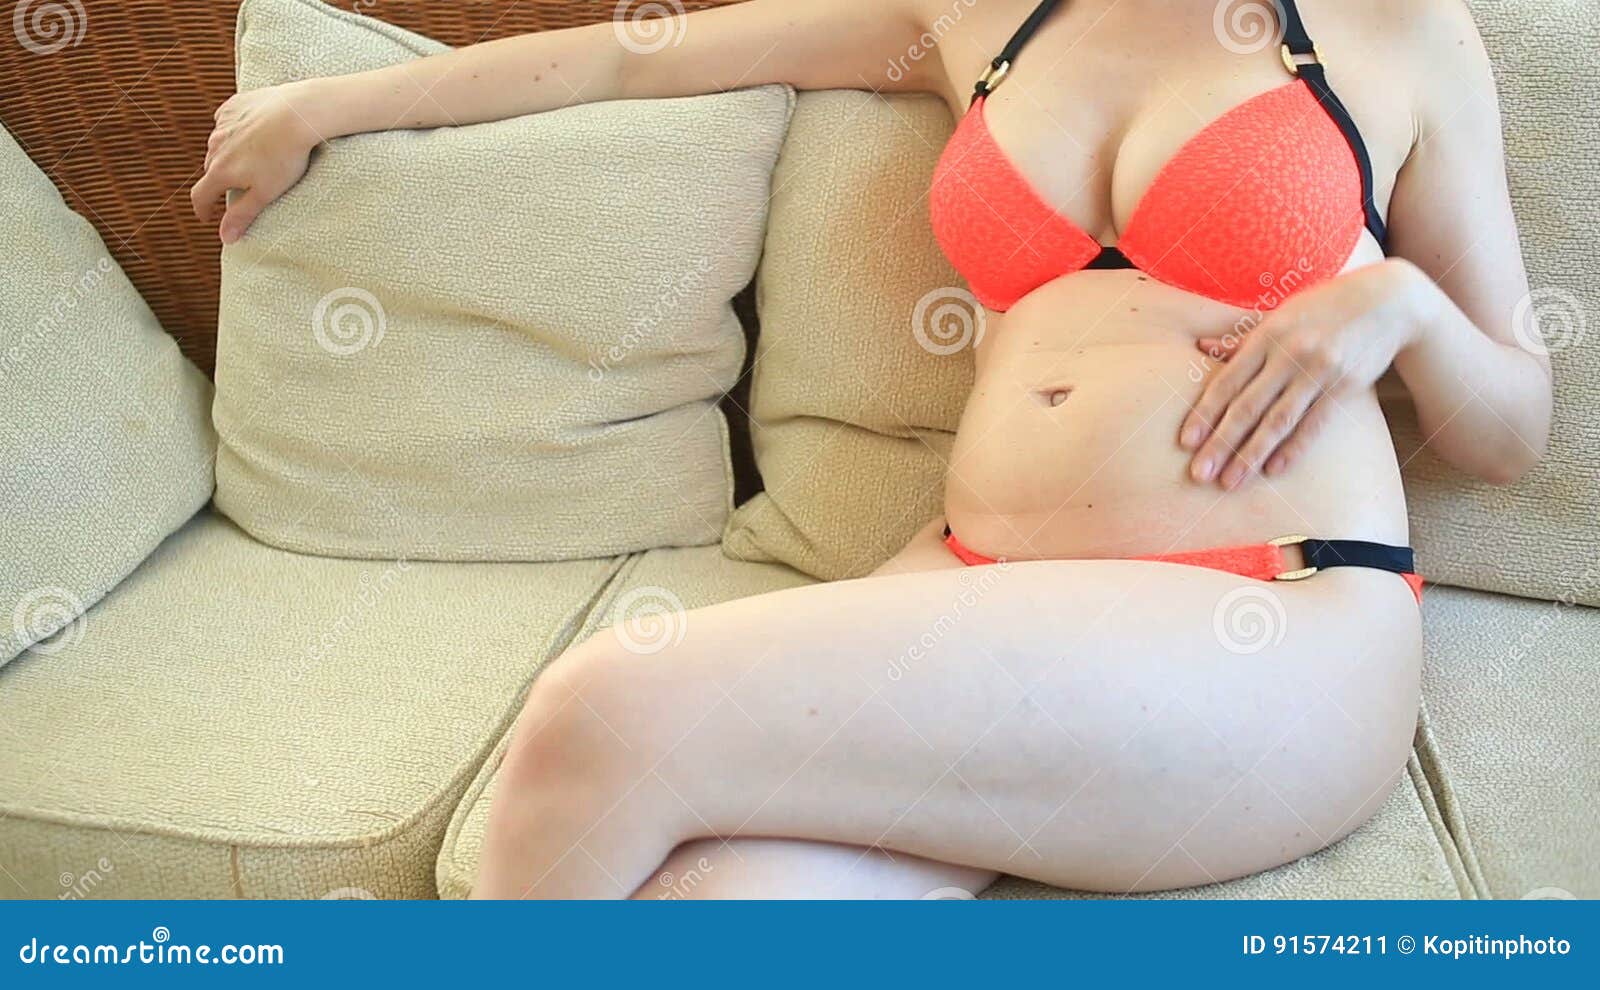 Girl with chubby belly